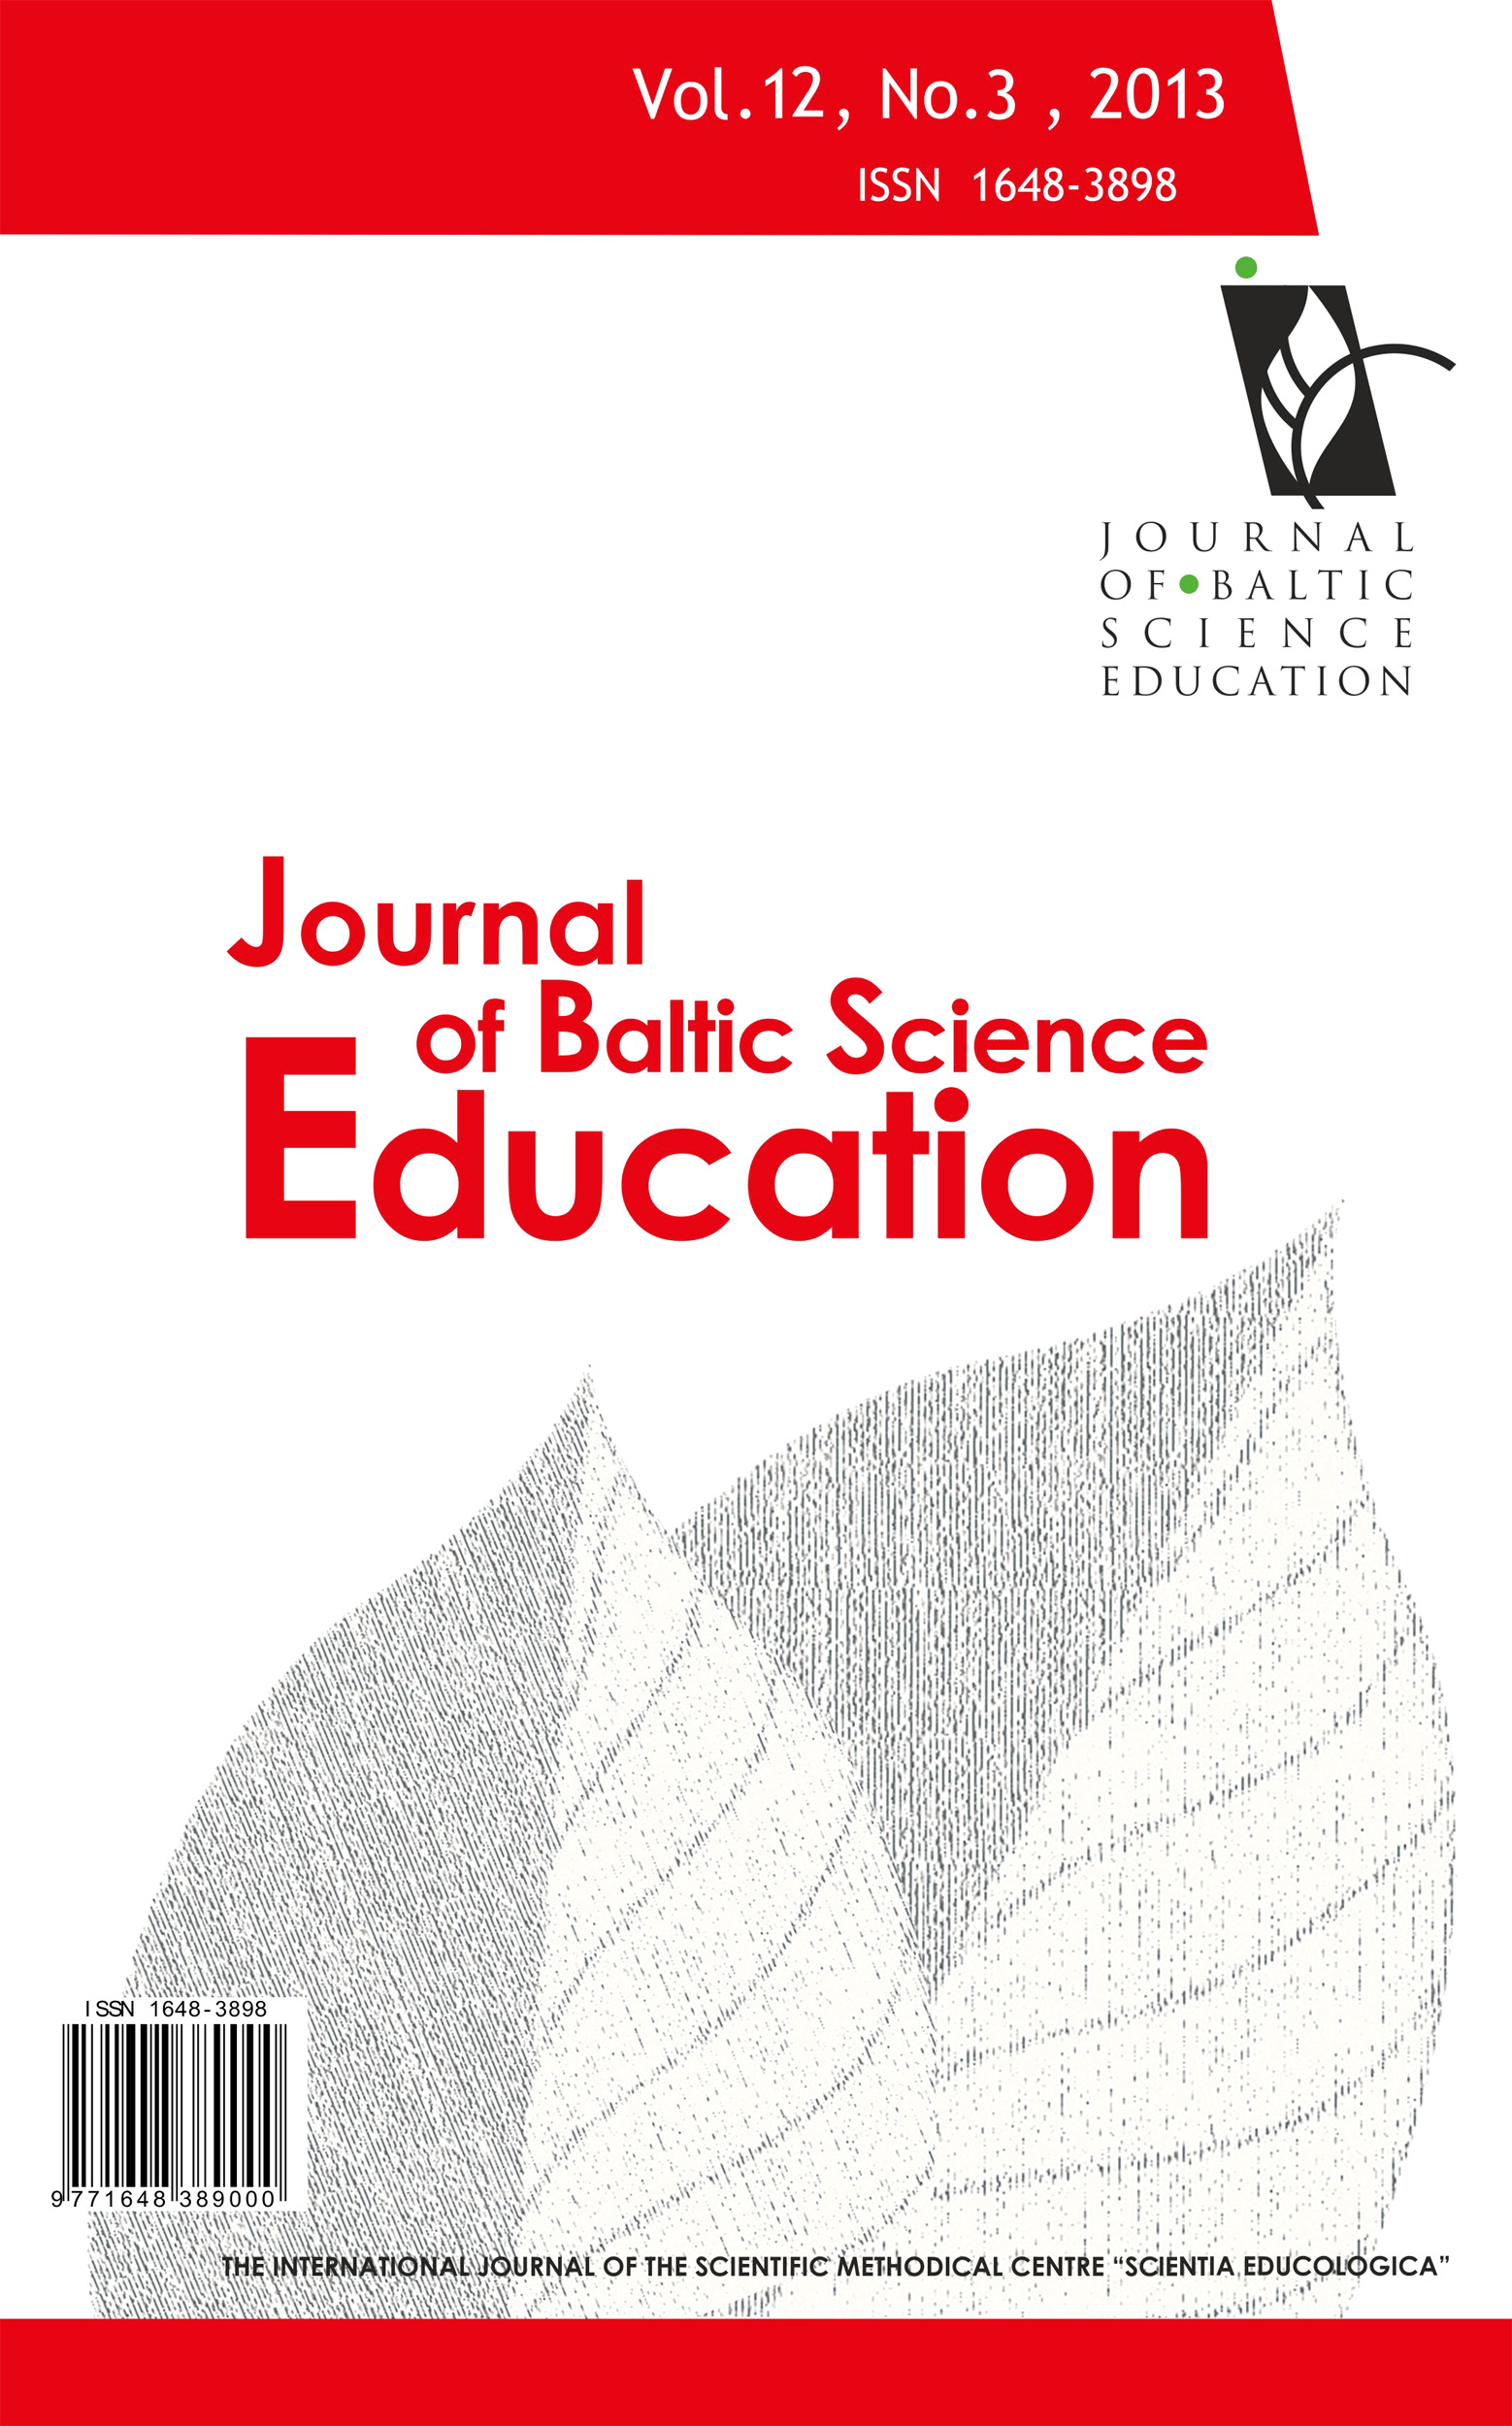 THE EMOTIONS ABOUT TEACHING AND LEARNING SCIENCE: A STUDY OF PROSPECTIVE PRIMARY TEACHERS IN THREE SPANISH UNIVERSITIES